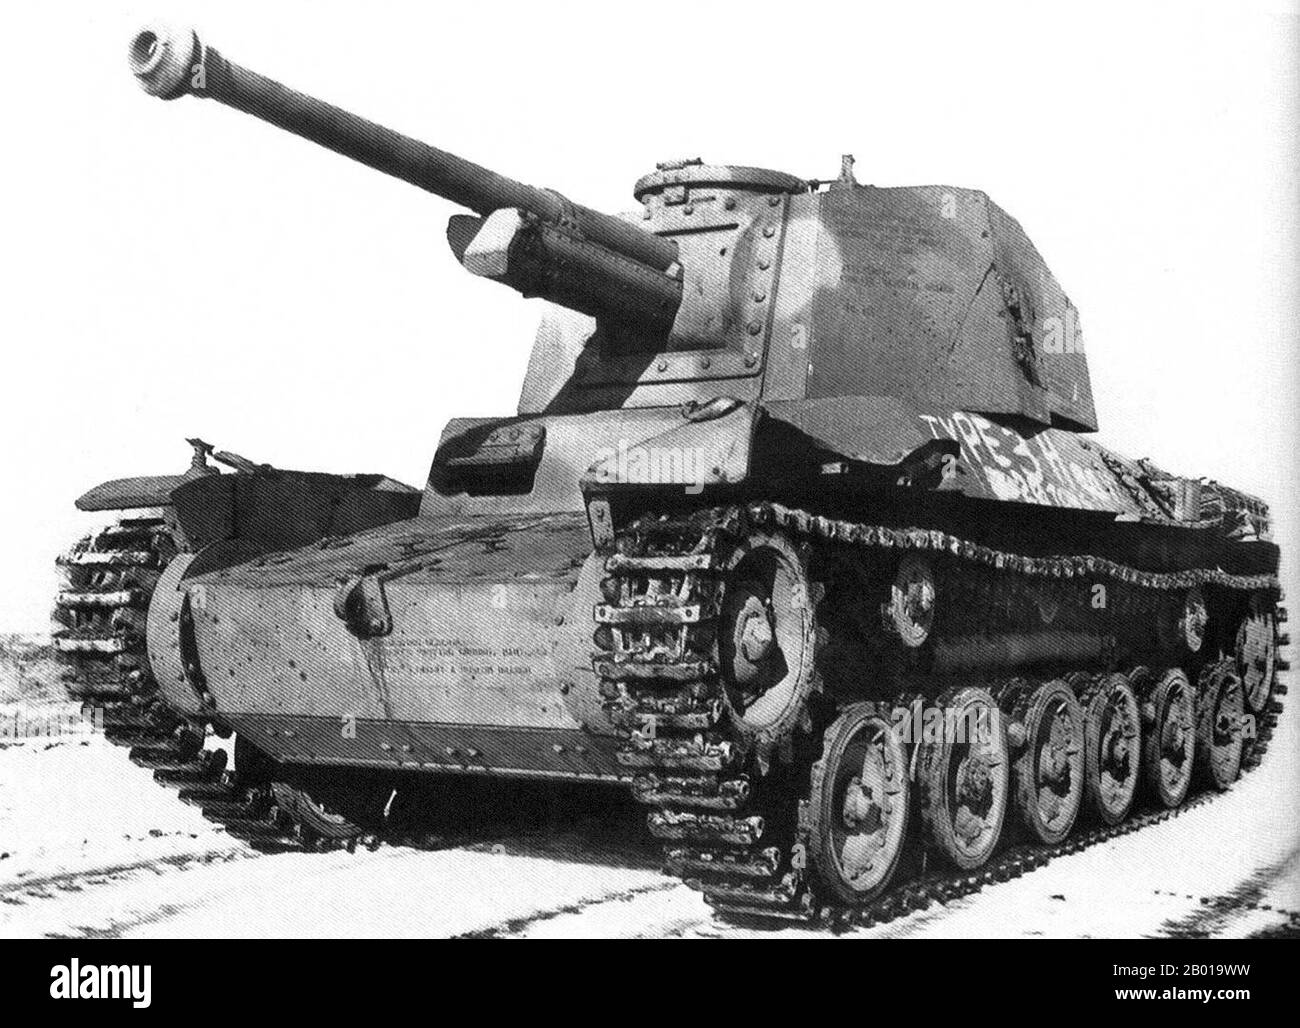 Mongolia: A Japanese Type 3 'Chi-Wel' medium tank of the type used at Khalkhin Gol, 1939.  The Battles of Khalkhin Gol were the decisive engagements of the undeclared Soviet-Japanese Border War fought between the Soviet Union, Mongolia and Japan in 1939. They were named after the river Khalkhin Gol, which passes through the battlefield. In Japan, the decisive battle of the conflict is known as the Nomonhan Incident (Nomonhan Jiken) after a nearby village, and was a total defeat for their army. Stock Photo